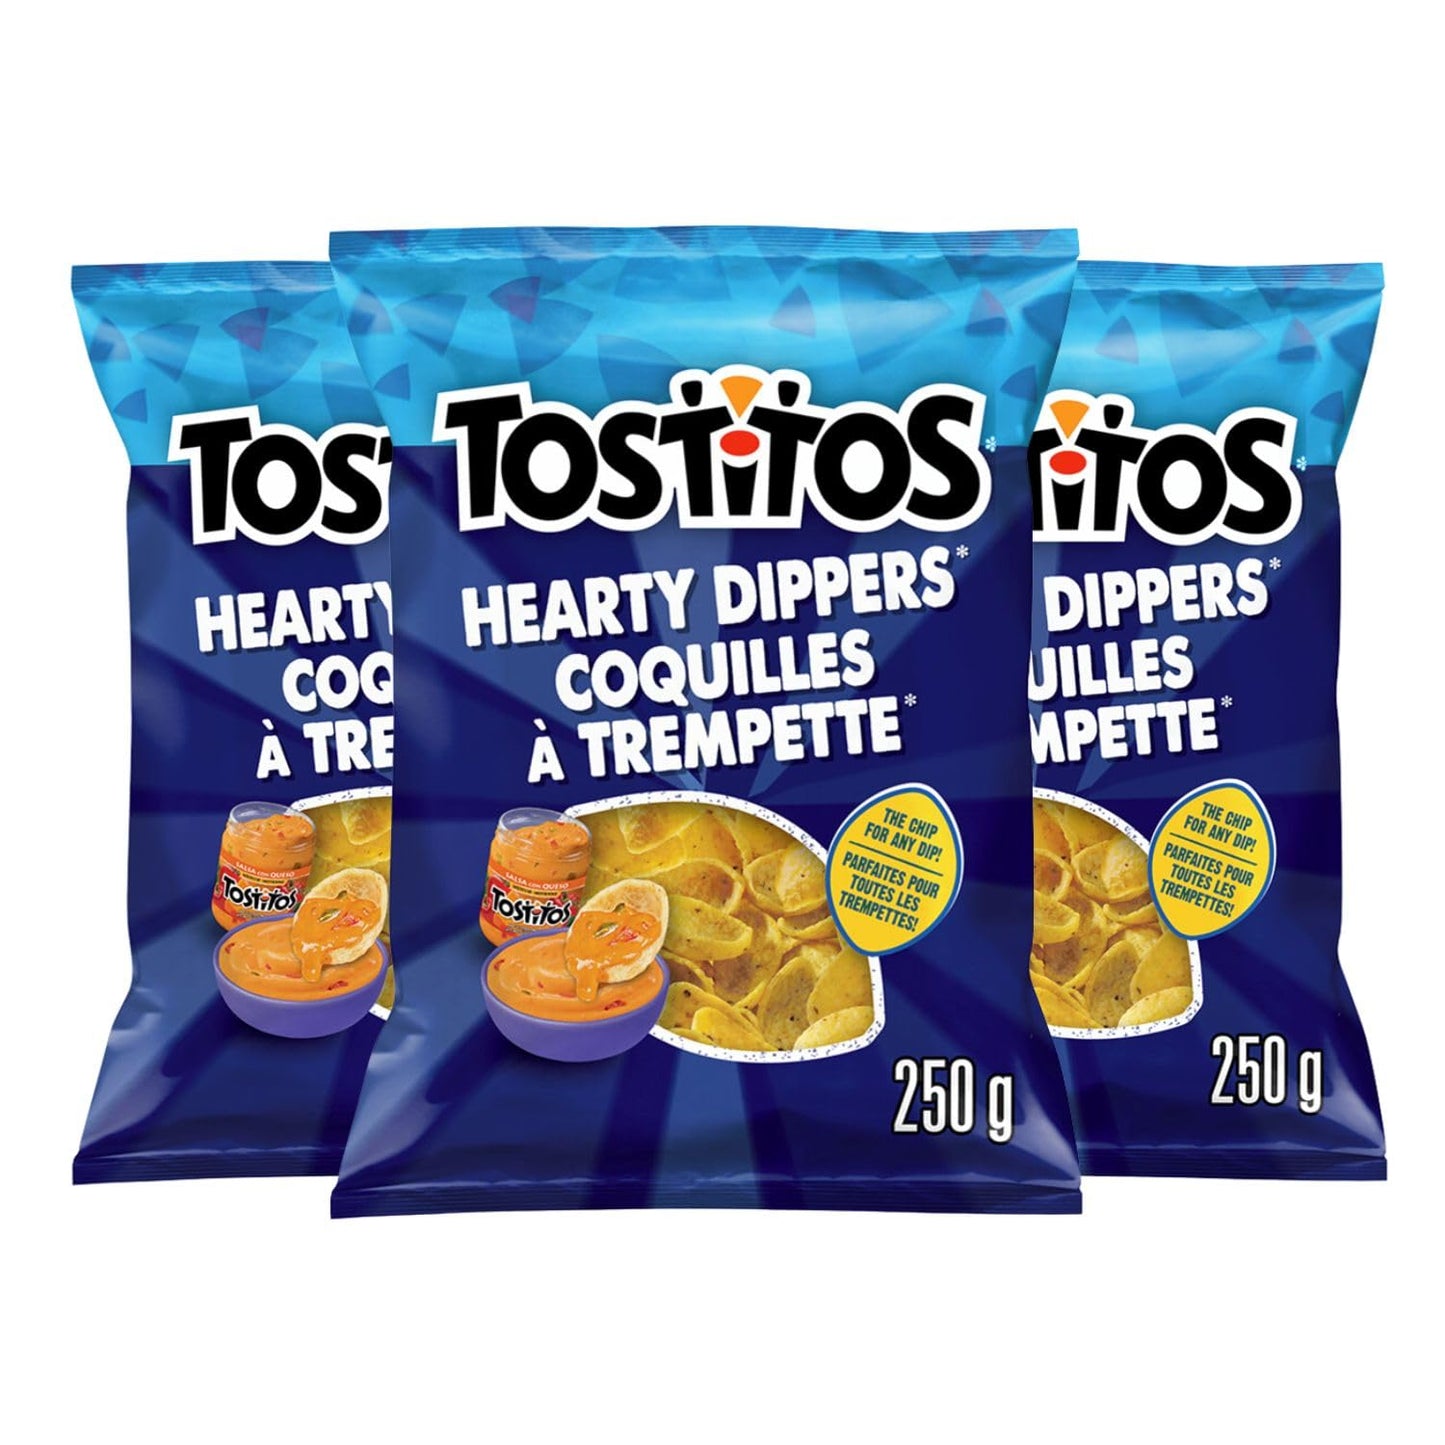 Tostitos Hearty Dippers Tortilla Chips pack of 3